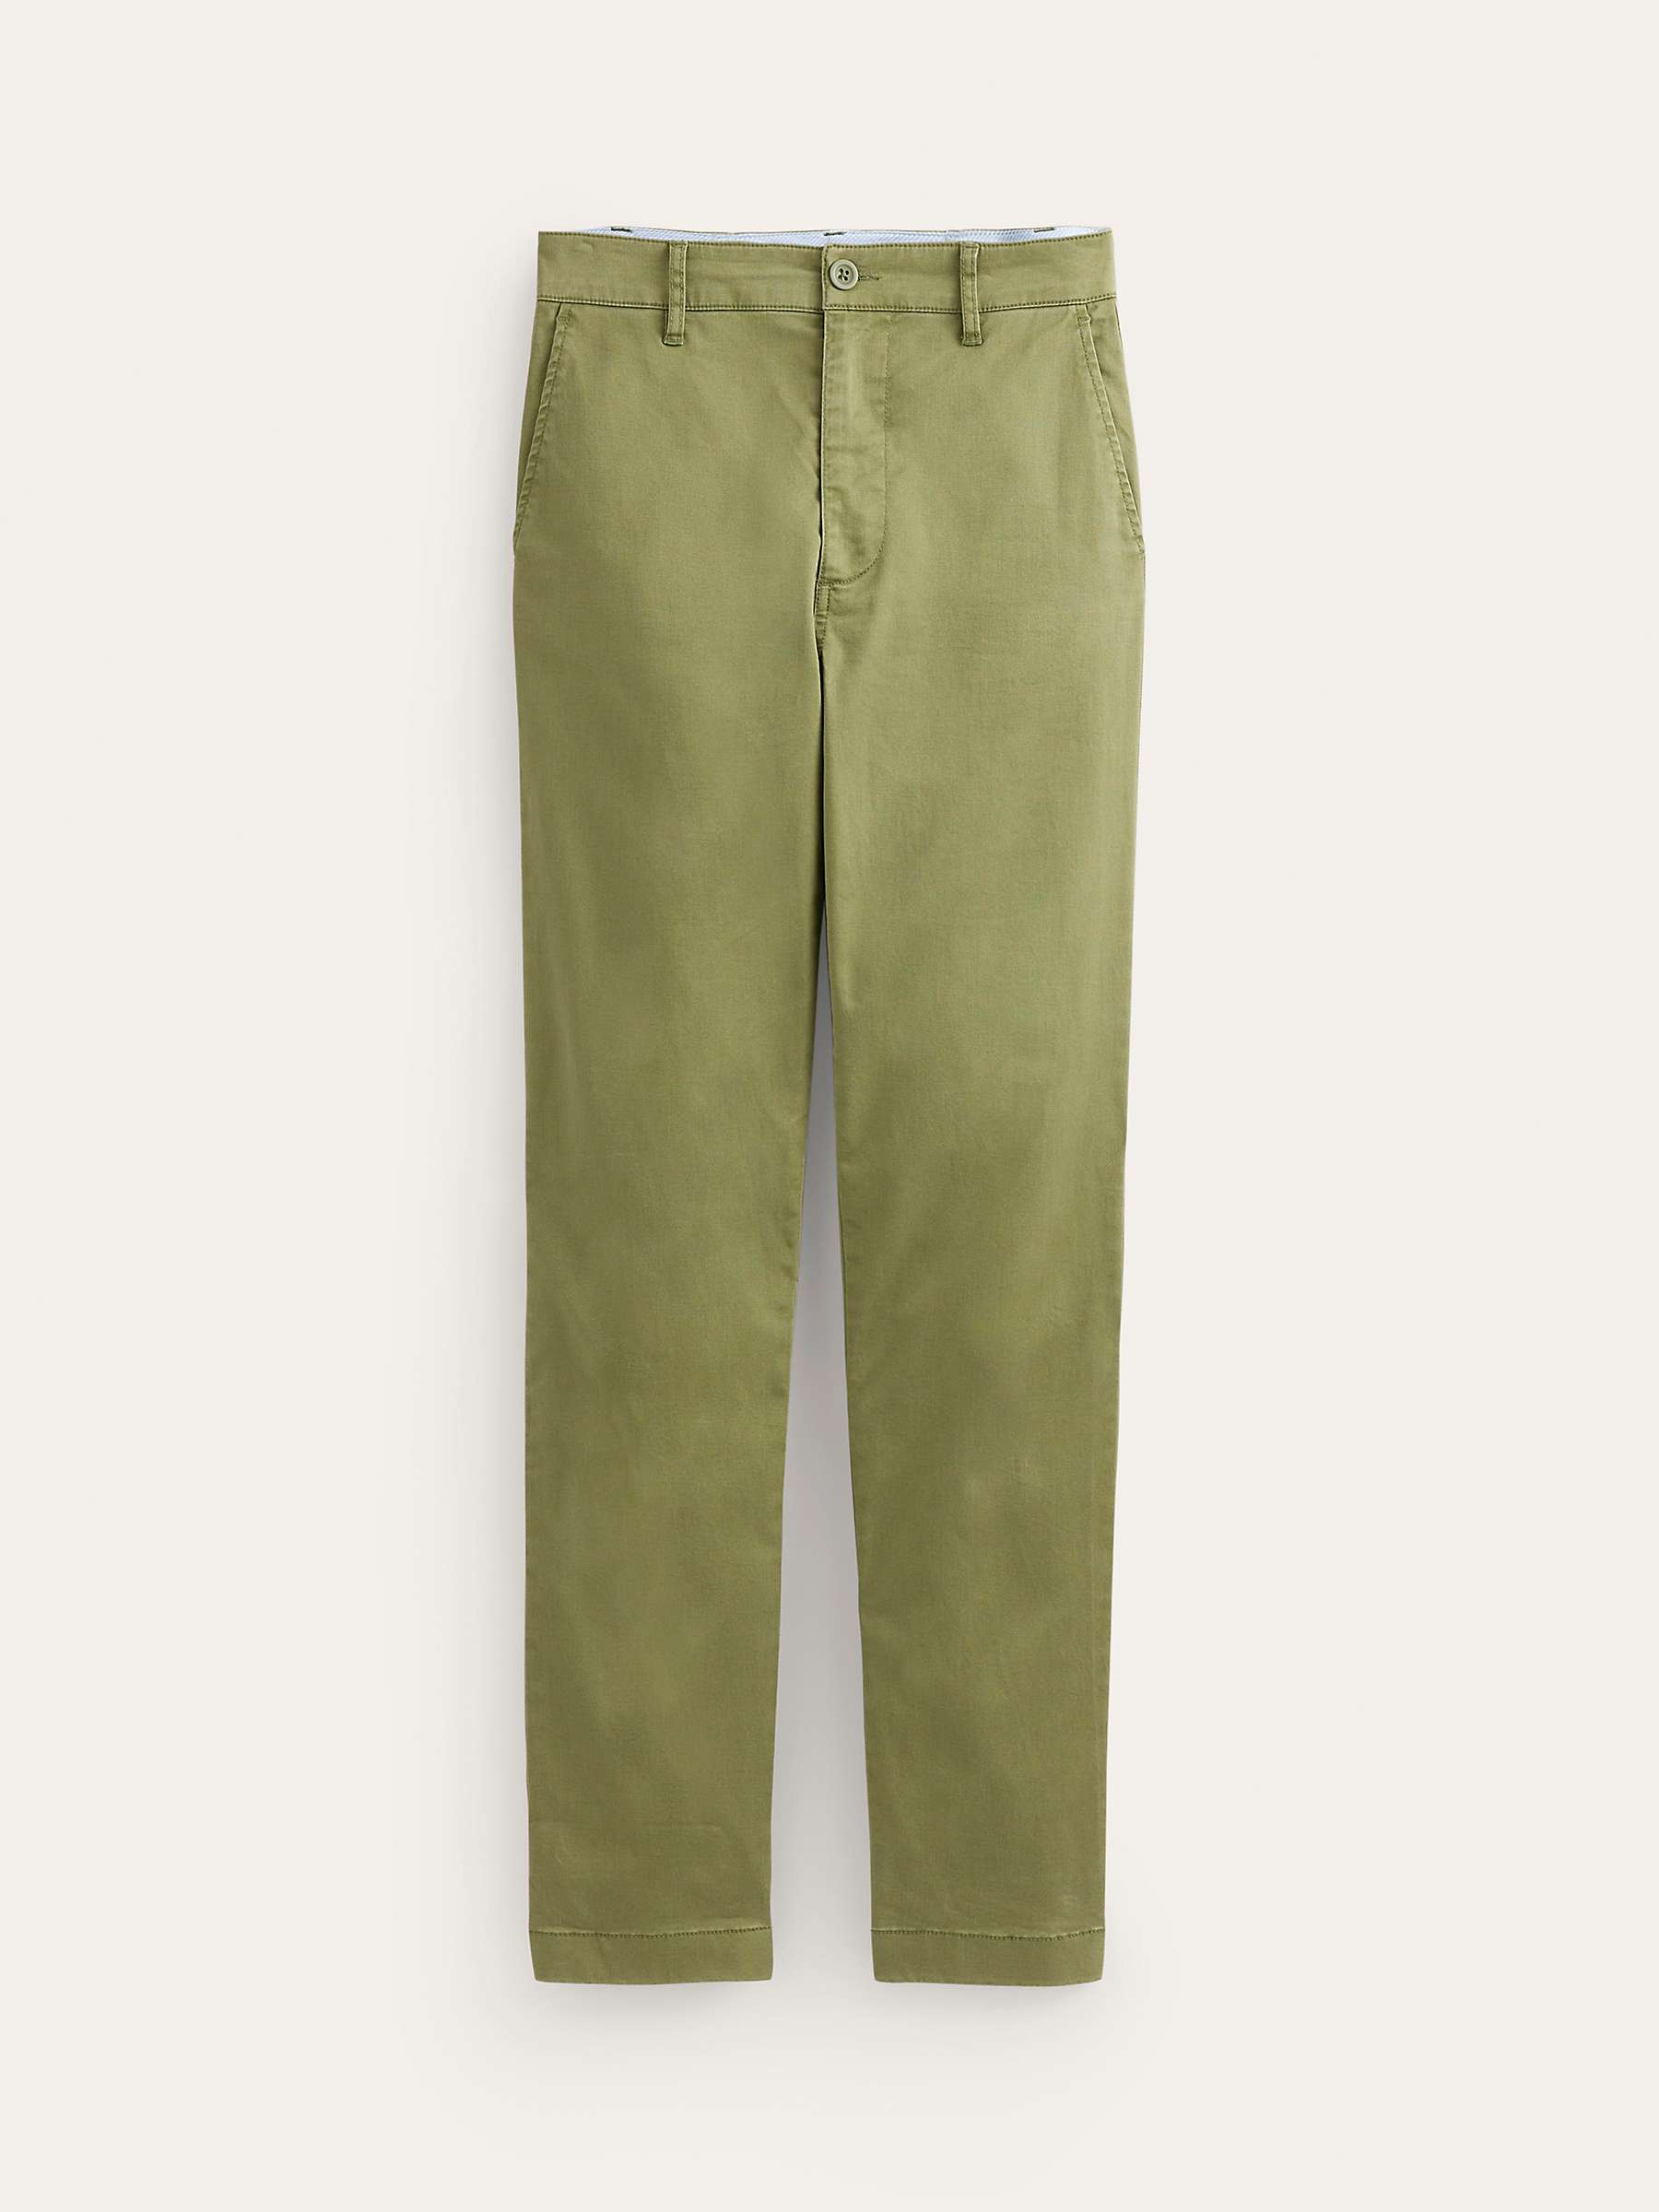 Buy Boden Barnsbury Chino Trousers, Mayfly Online at johnlewis.com